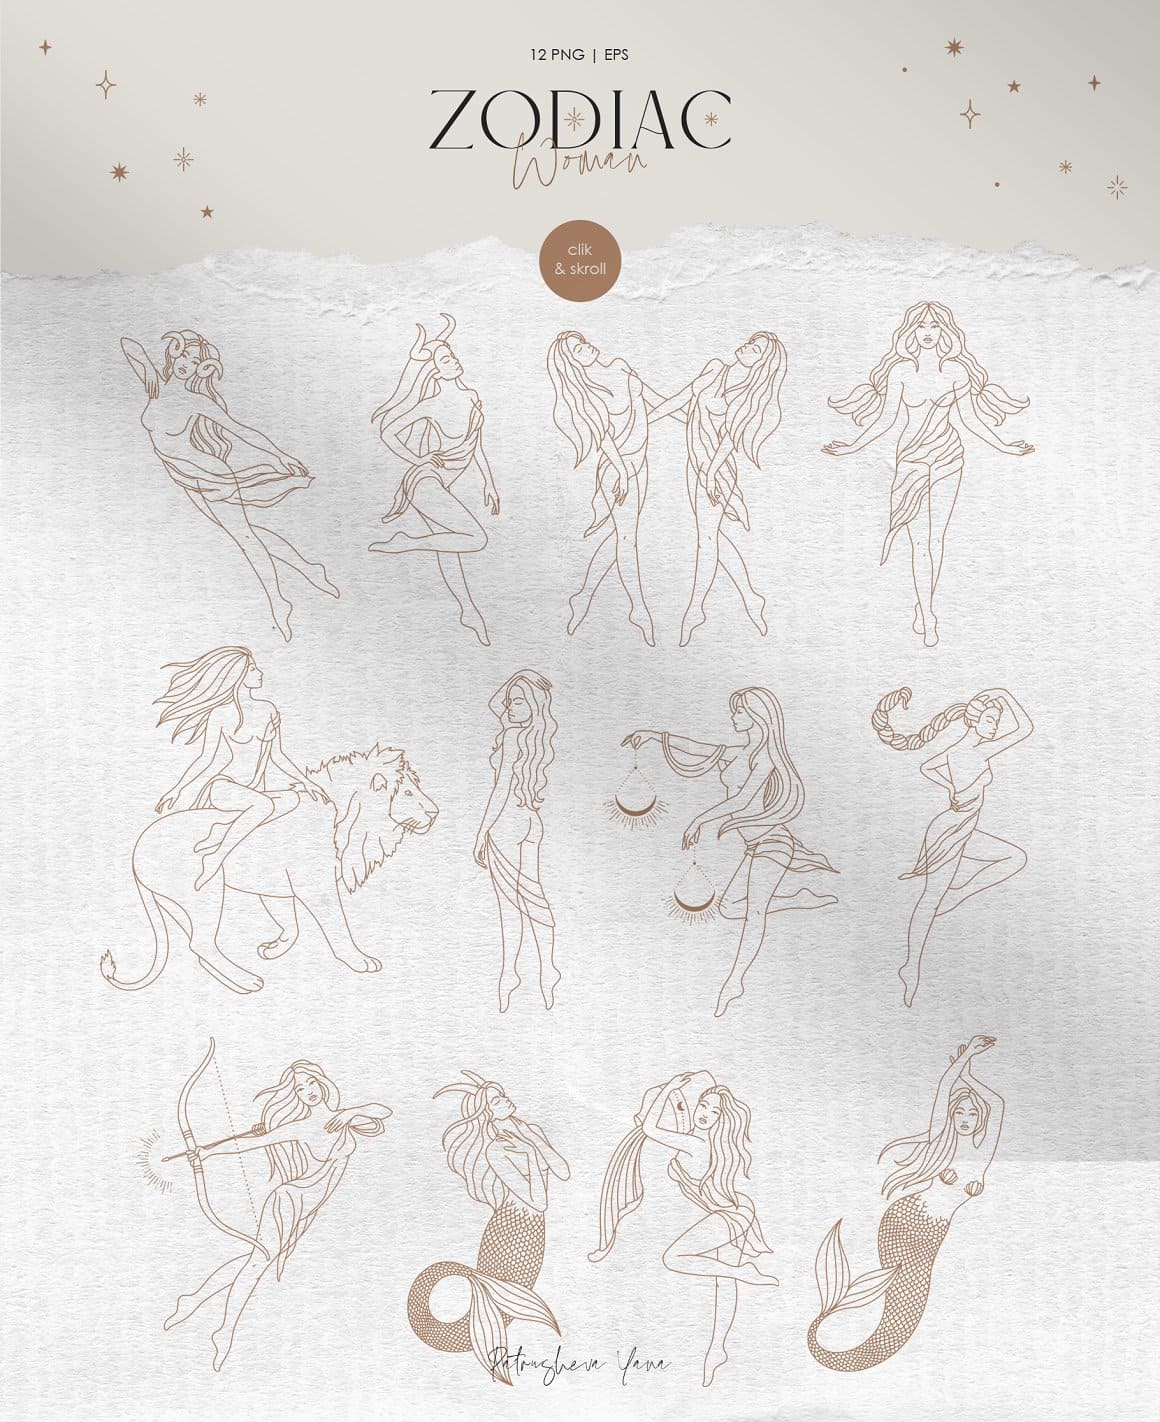 Golden drawings of girls, zodiac signs on a beige background.